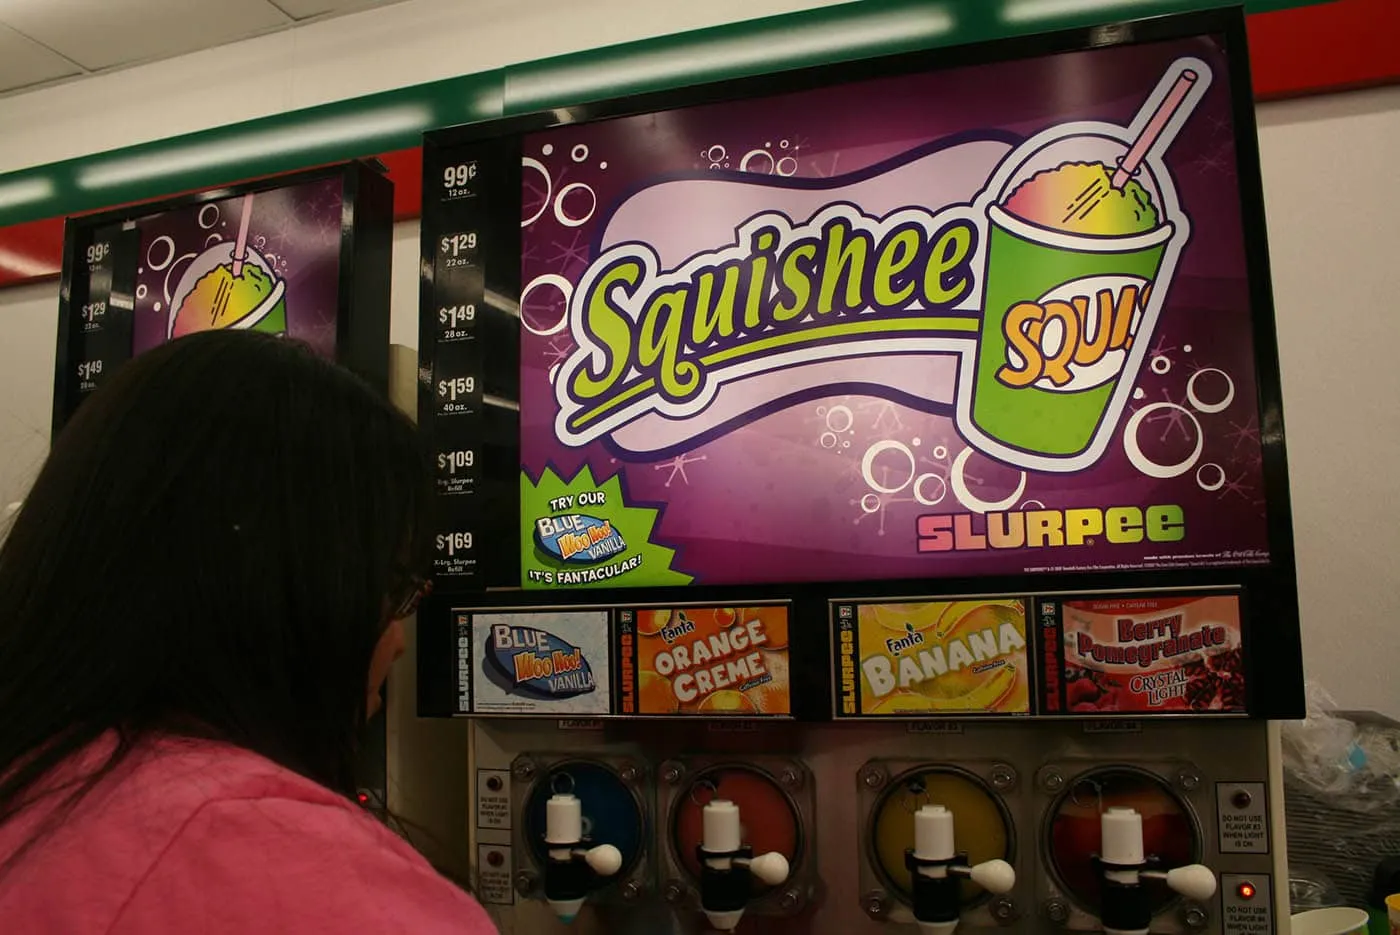 Squishee machine at The Simpsons Kwik E Mart 7-11 in Chicago, Illinois in Chicago, Illinois